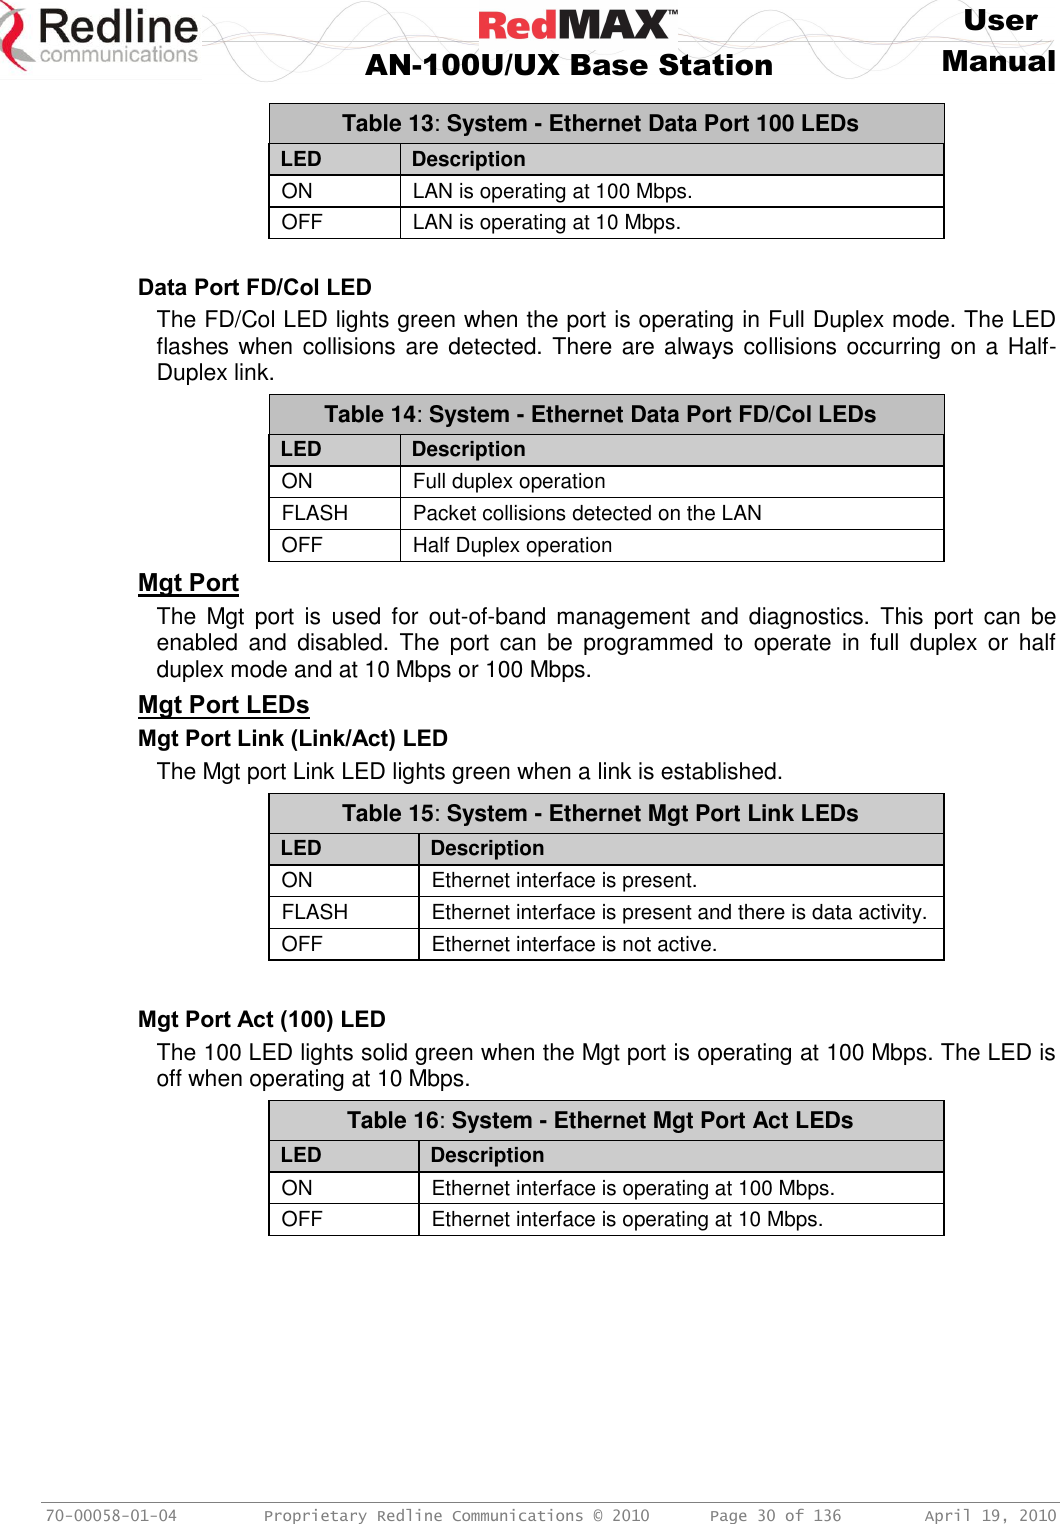     User  AN-100U/UX Base Station Manual   70-00058-01-04  Proprietary Redline Communications © 2010   Page 30 of 136  April 19, 2010 Table 13: System - Ethernet Data Port 100 LEDs LED Description ON LAN is operating at 100 Mbps. OFF LAN is operating at 10 Mbps.  Data Port FD/Col LED The FD/Col LED lights green when the port is operating in Full Duplex mode. The LED flashes when collisions are detected. There are always collisions occurring on a Half-Duplex link. Table 14: System - Ethernet Data Port FD/Col LEDs LED Description ON Full duplex operation FLASH Packet collisions detected on the LAN OFF Half Duplex operation Mgt Port The  Mgt  port  is  used  for  out-of-band  management and  diagnostics. This port  can  be enabled  and  disabled.  The  port  can  be  programmed  to  operate  in  full  duplex  or  half duplex mode and at 10 Mbps or 100 Mbps. Mgt Port LEDs Mgt Port Link (Link/Act) LED The Mgt port Link LED lights green when a link is established. Table 15: System - Ethernet Mgt Port Link LEDs LED Description ON Ethernet interface is present. FLASH Ethernet interface is present and there is data activity. OFF Ethernet interface is not active.   Mgt Port Act (100) LED The 100 LED lights solid green when the Mgt port is operating at 100 Mbps. The LED is off when operating at 10 Mbps. Table 16: System - Ethernet Mgt Port Act LEDs LED Description ON Ethernet interface is operating at 100 Mbps. OFF Ethernet interface is operating at 10 Mbps.  